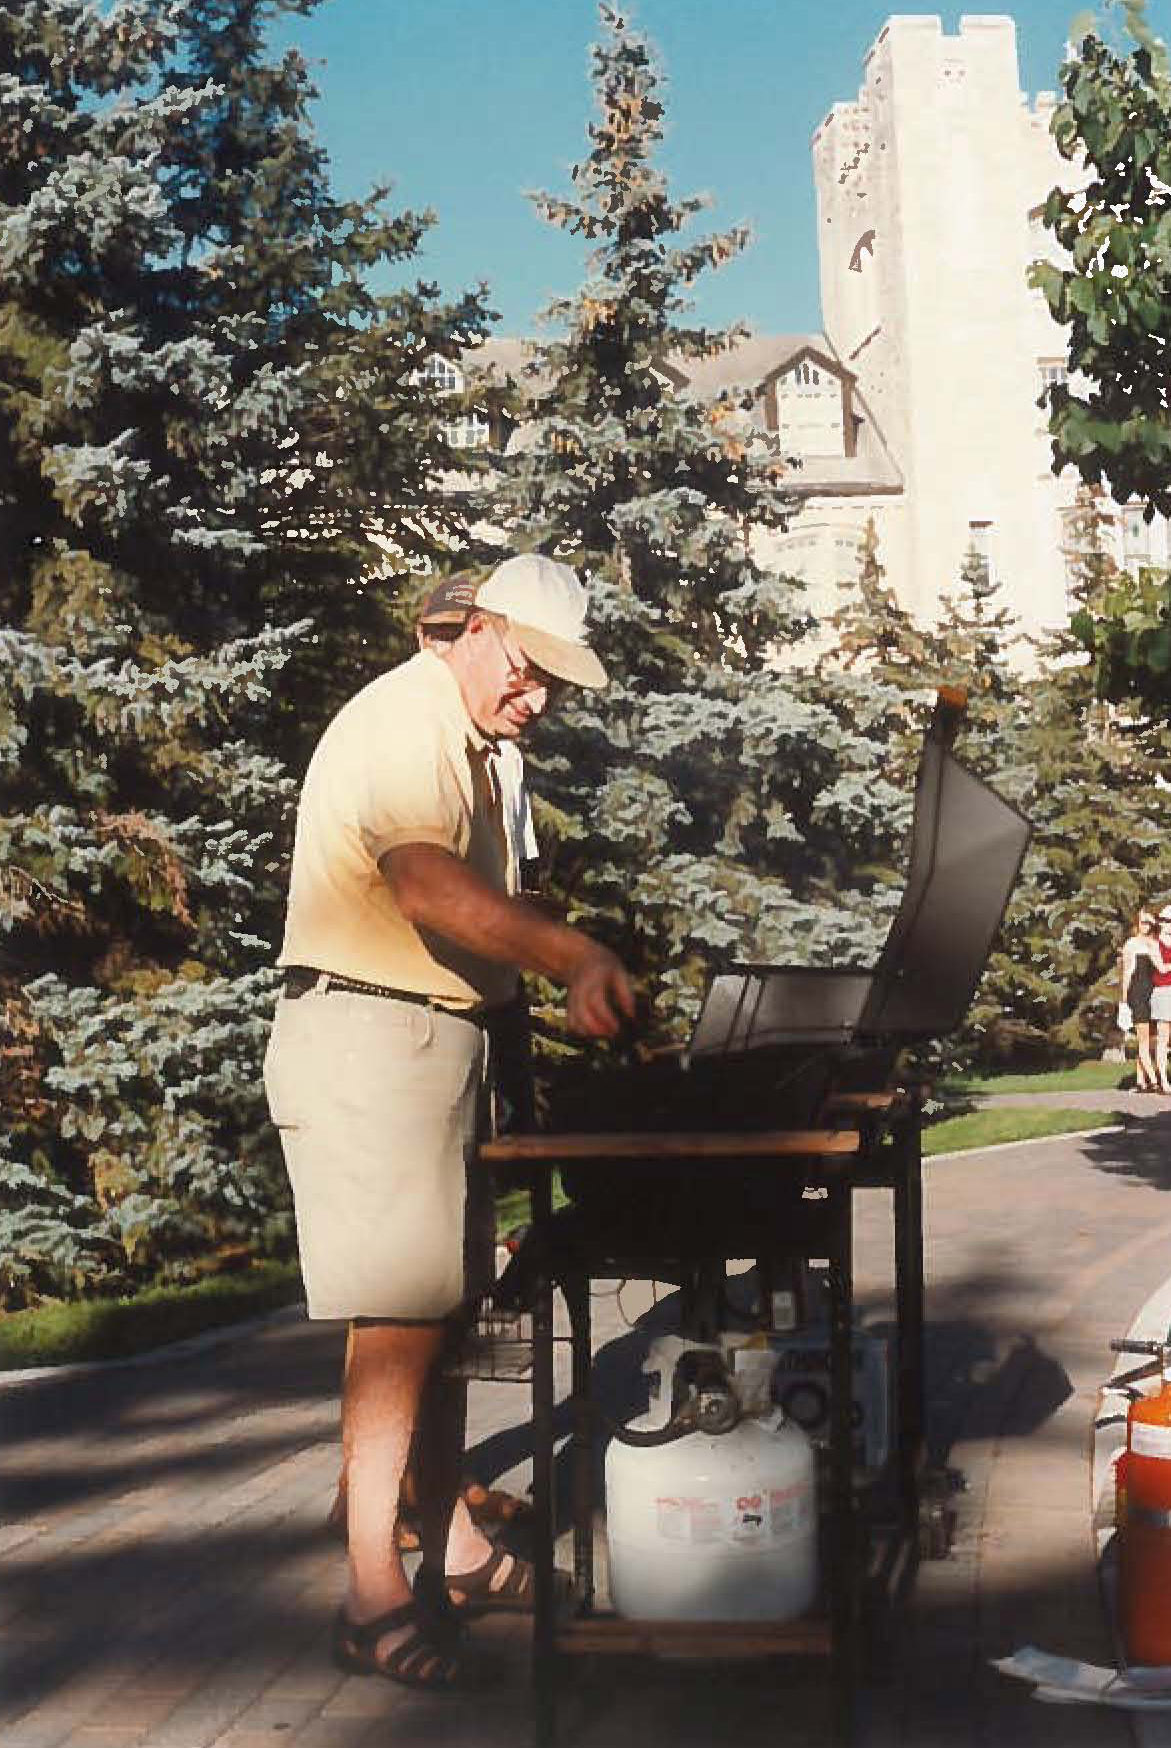 Bob Braeburn enjoyed participating in UM activities such as the orientation BBQ